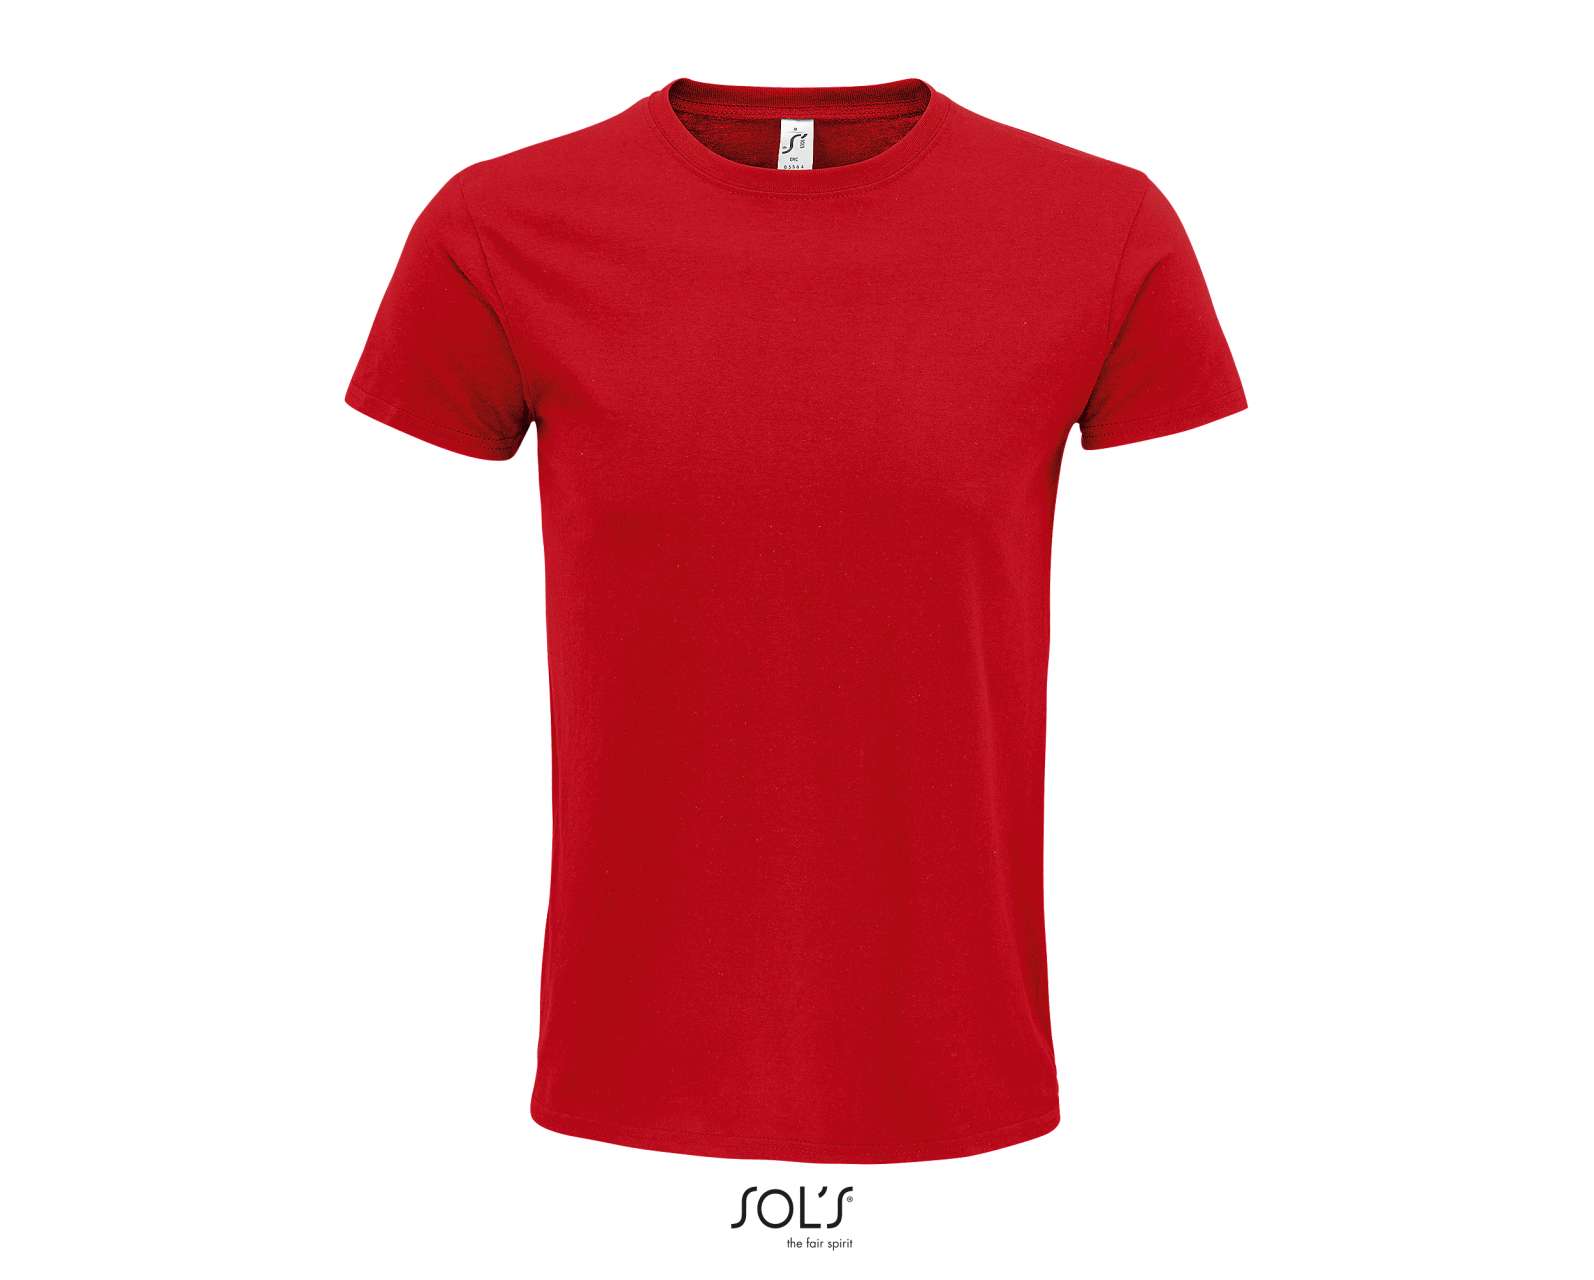 SOL'S EPIC - UNISEX ROUND-NECK FITTED JERSEY T-SHIRT